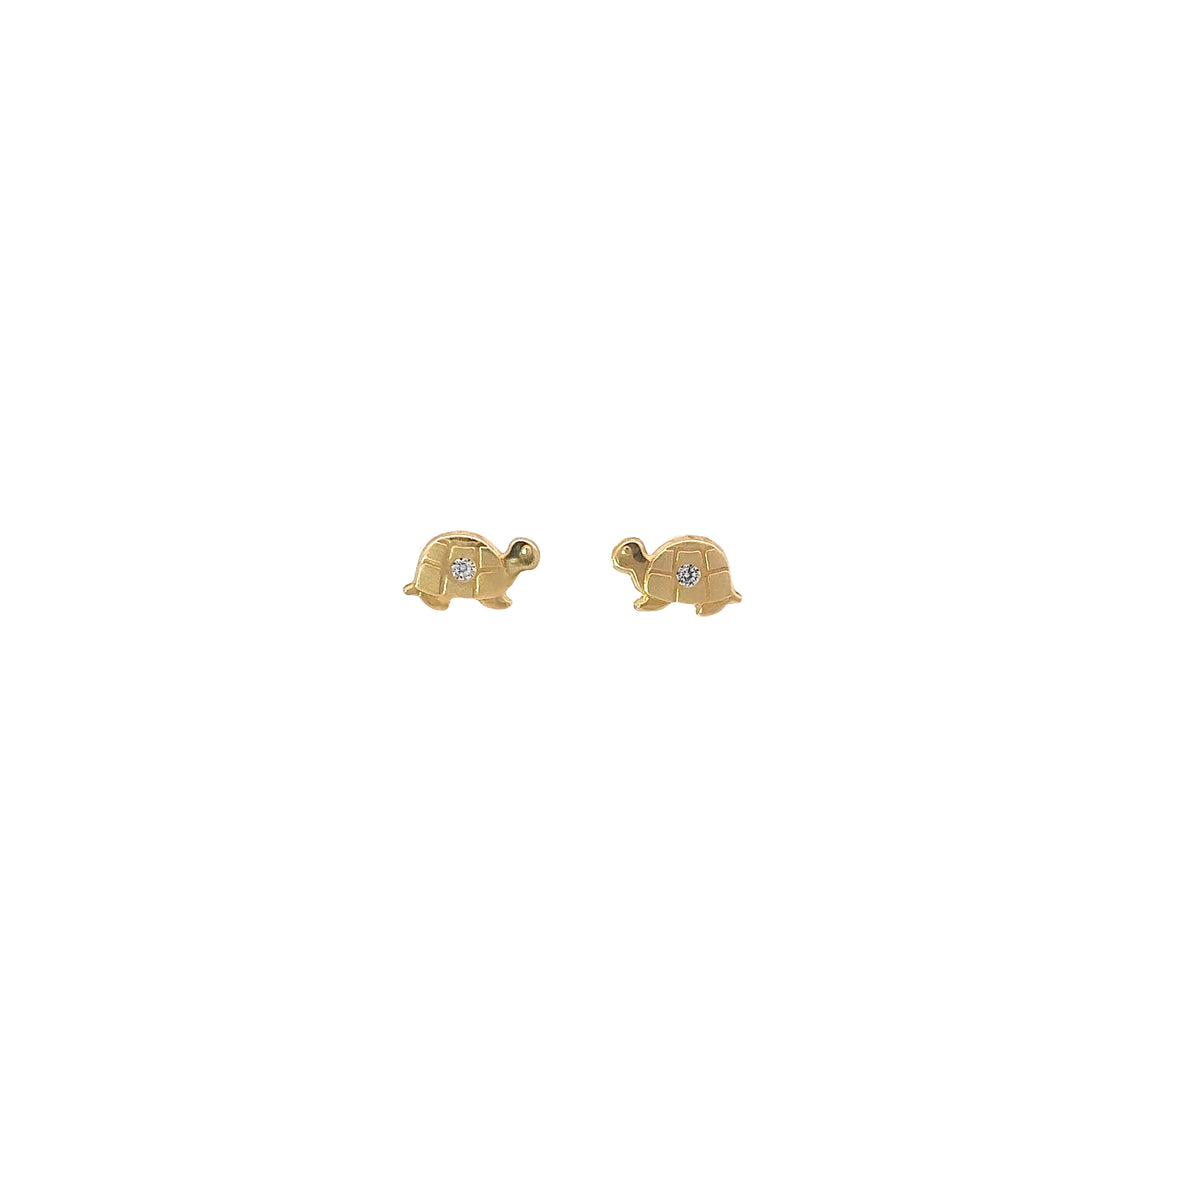 Baby 14k yellow gold Turtle stud earrings with CZ